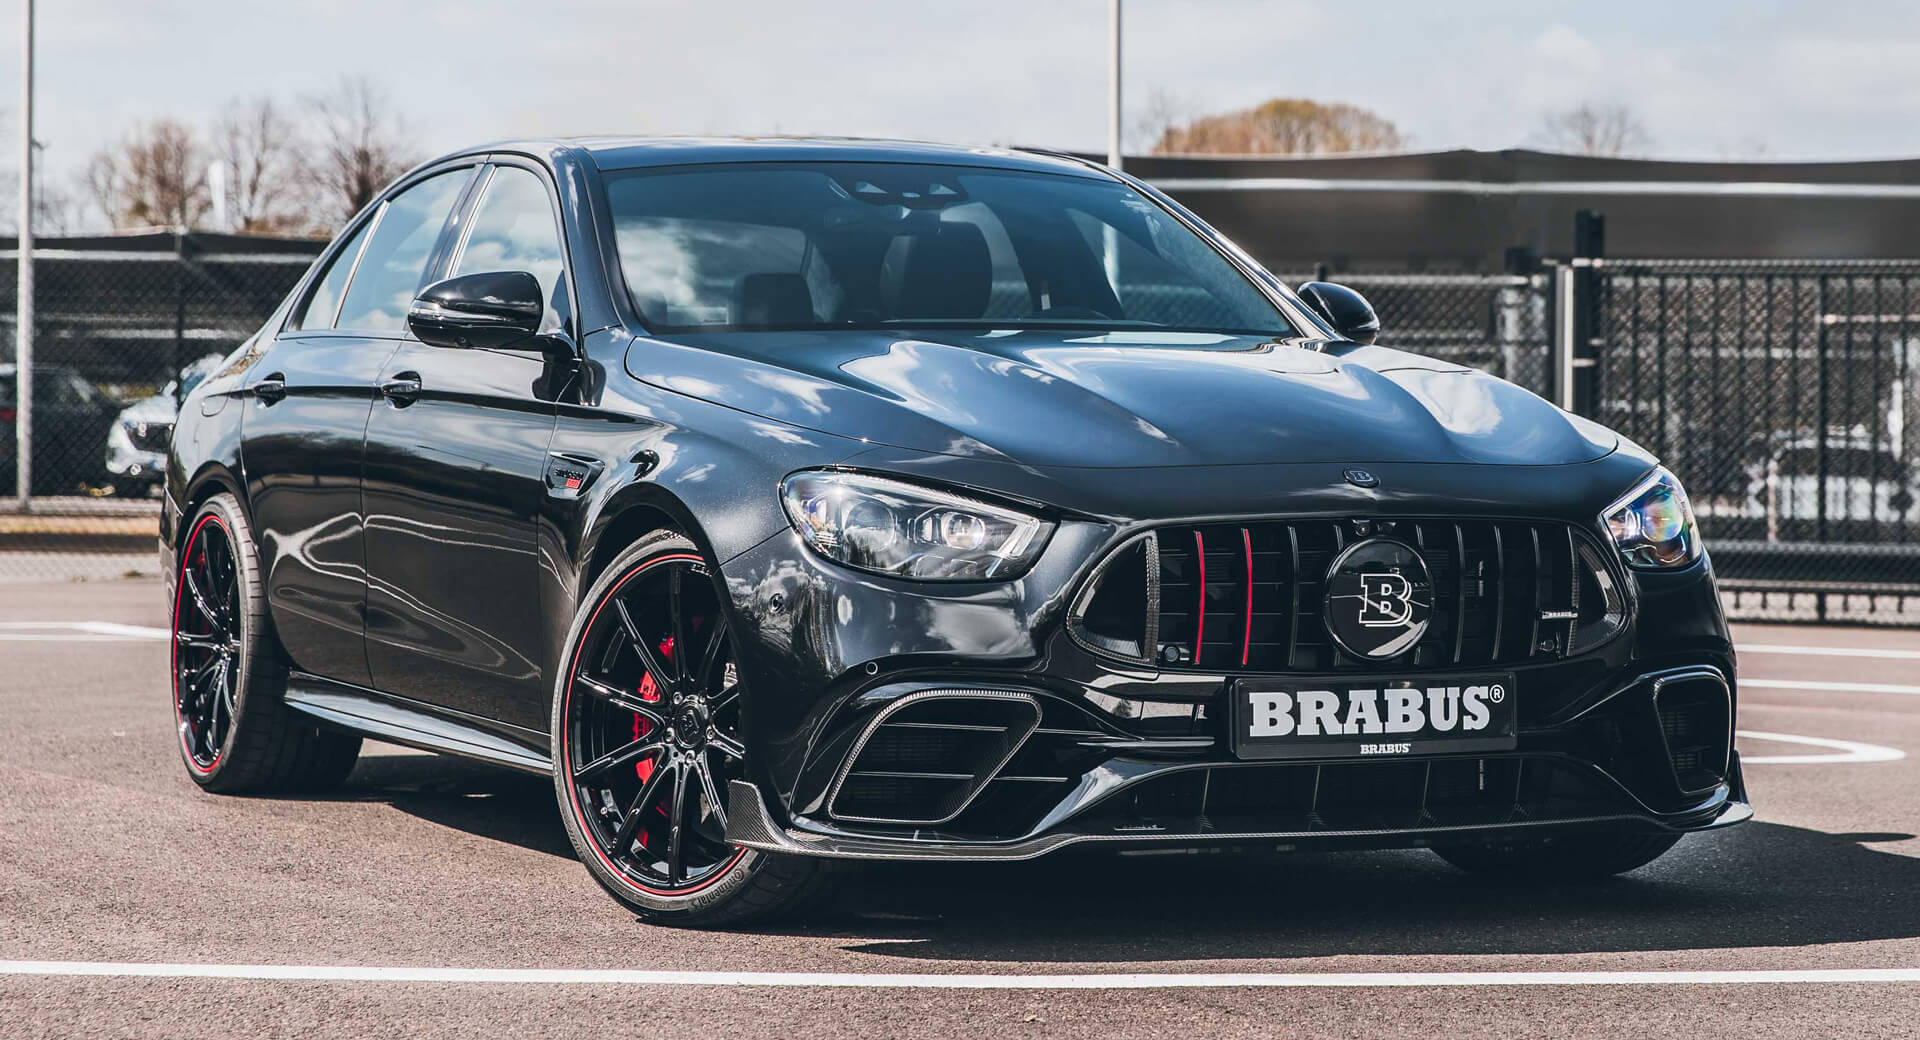 Brabus 800 Is A 789 HP 2021 Mercedes-AMG E63 That Eats Supercars